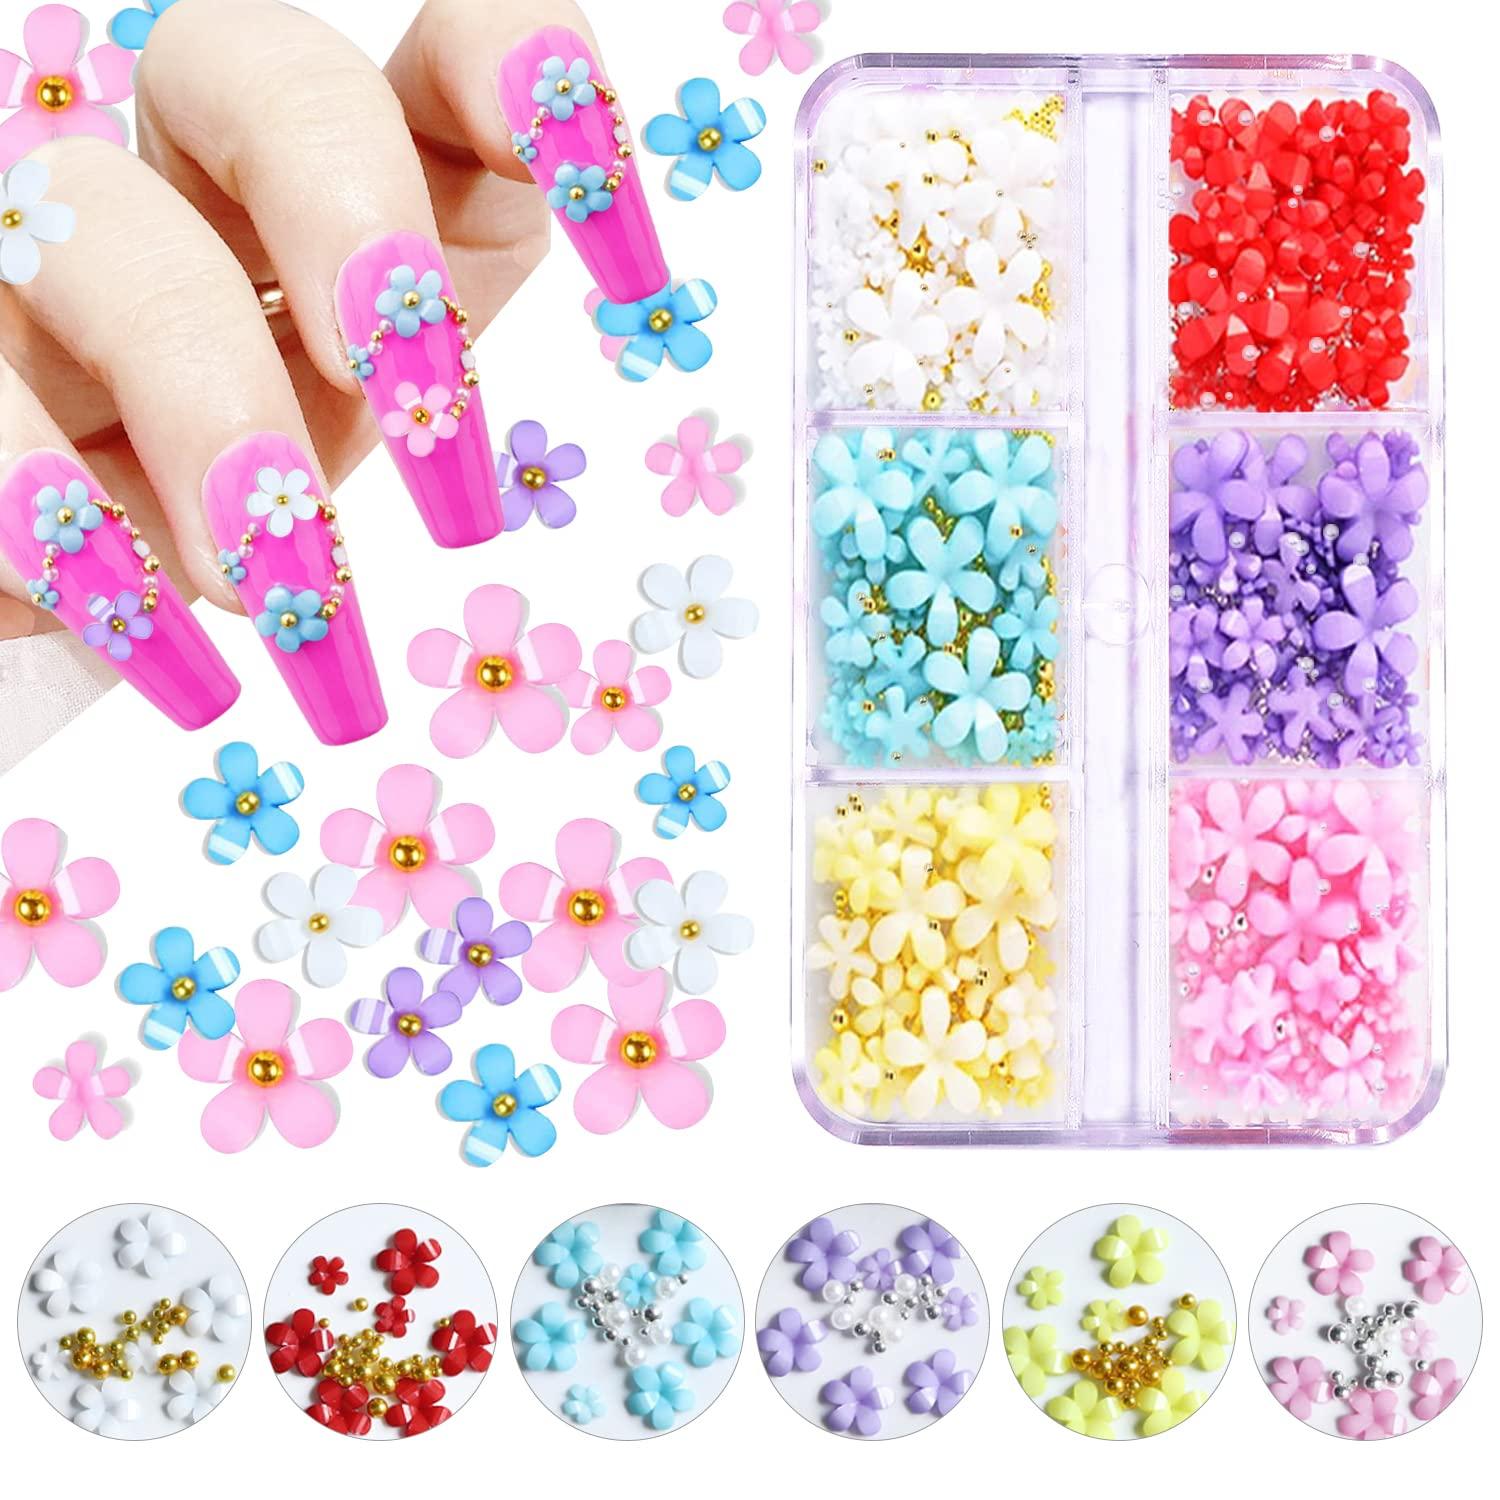 3D Flower Nail Charms for Acrylic Nails,12 Colors Flowers 3 Colors Beads  Nail Flowers with Gold Silver Pearl,Spring Flower Mixed Nail Art Craft  Design